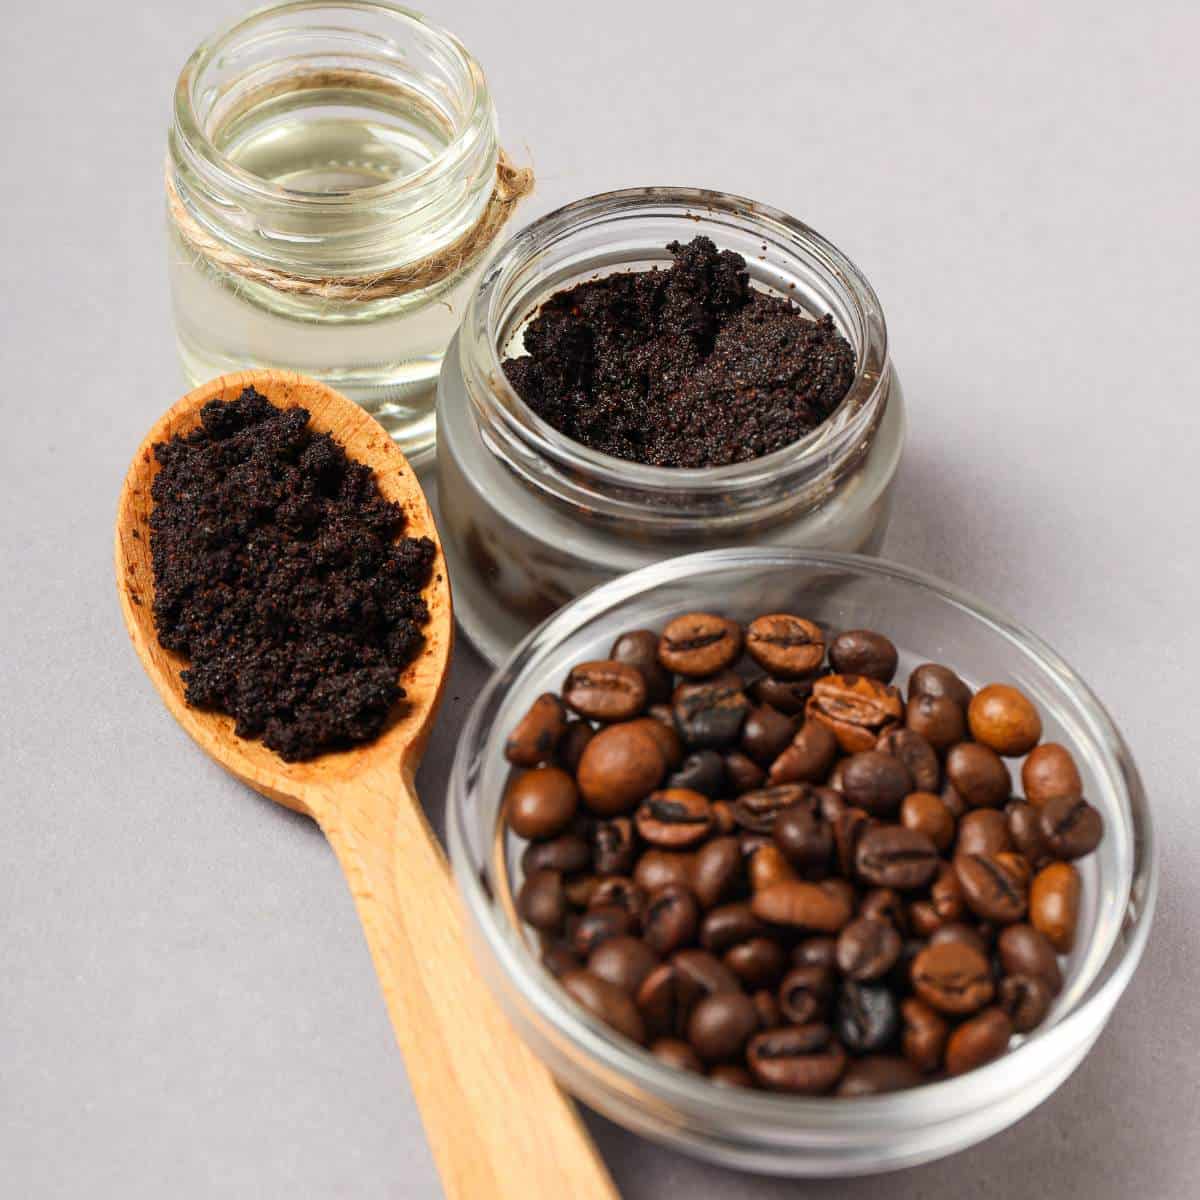 Coffee beans, coffee powder, and a wooden spoon on a gray background.